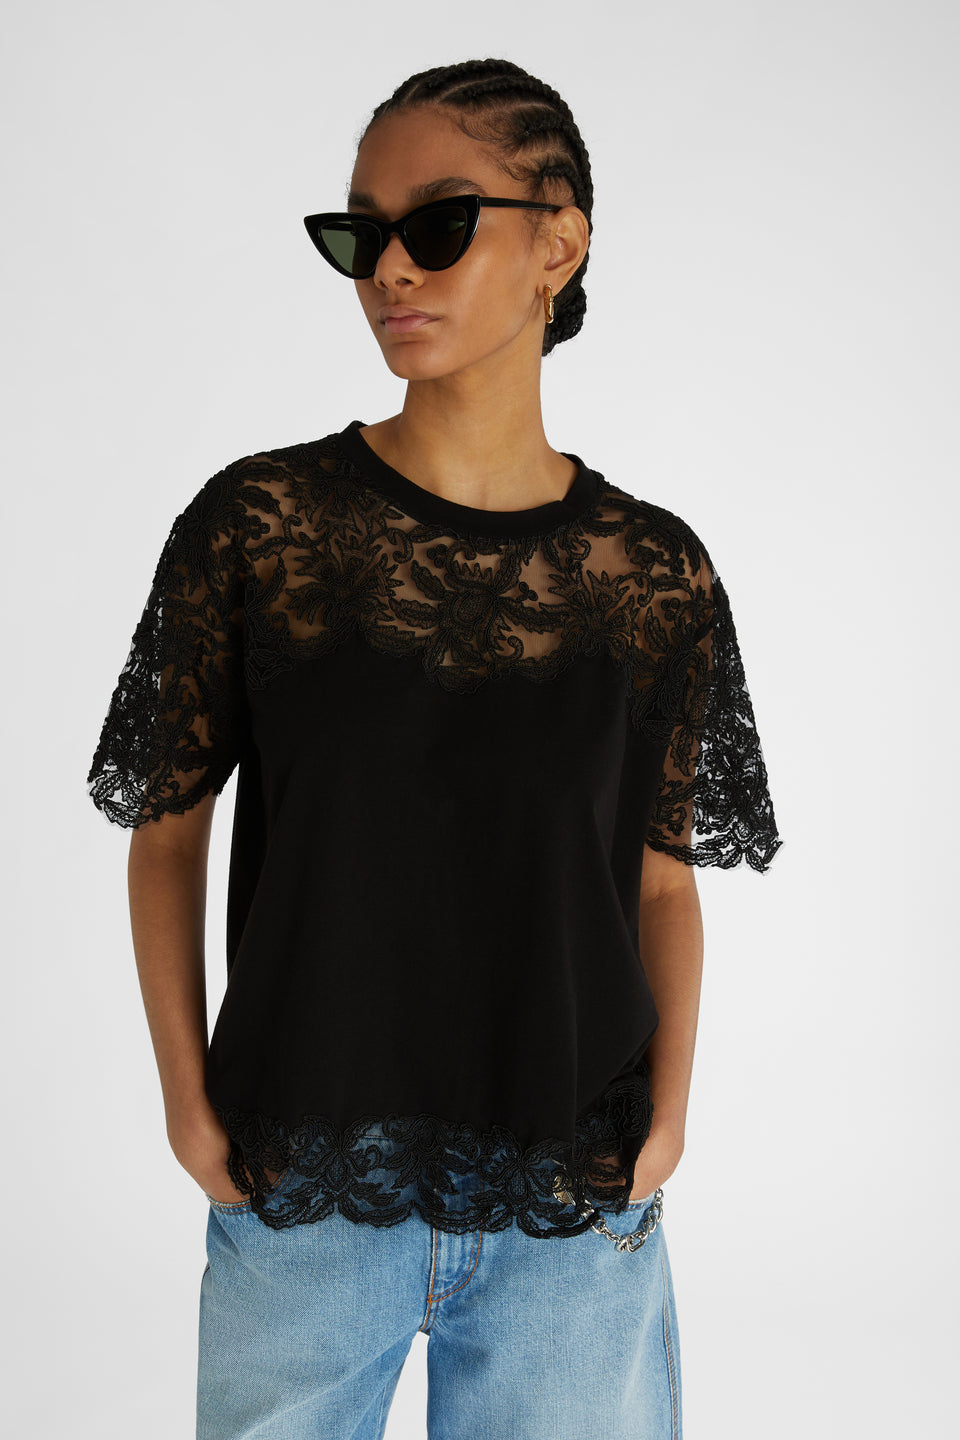 Black cotton and lace T-shirt